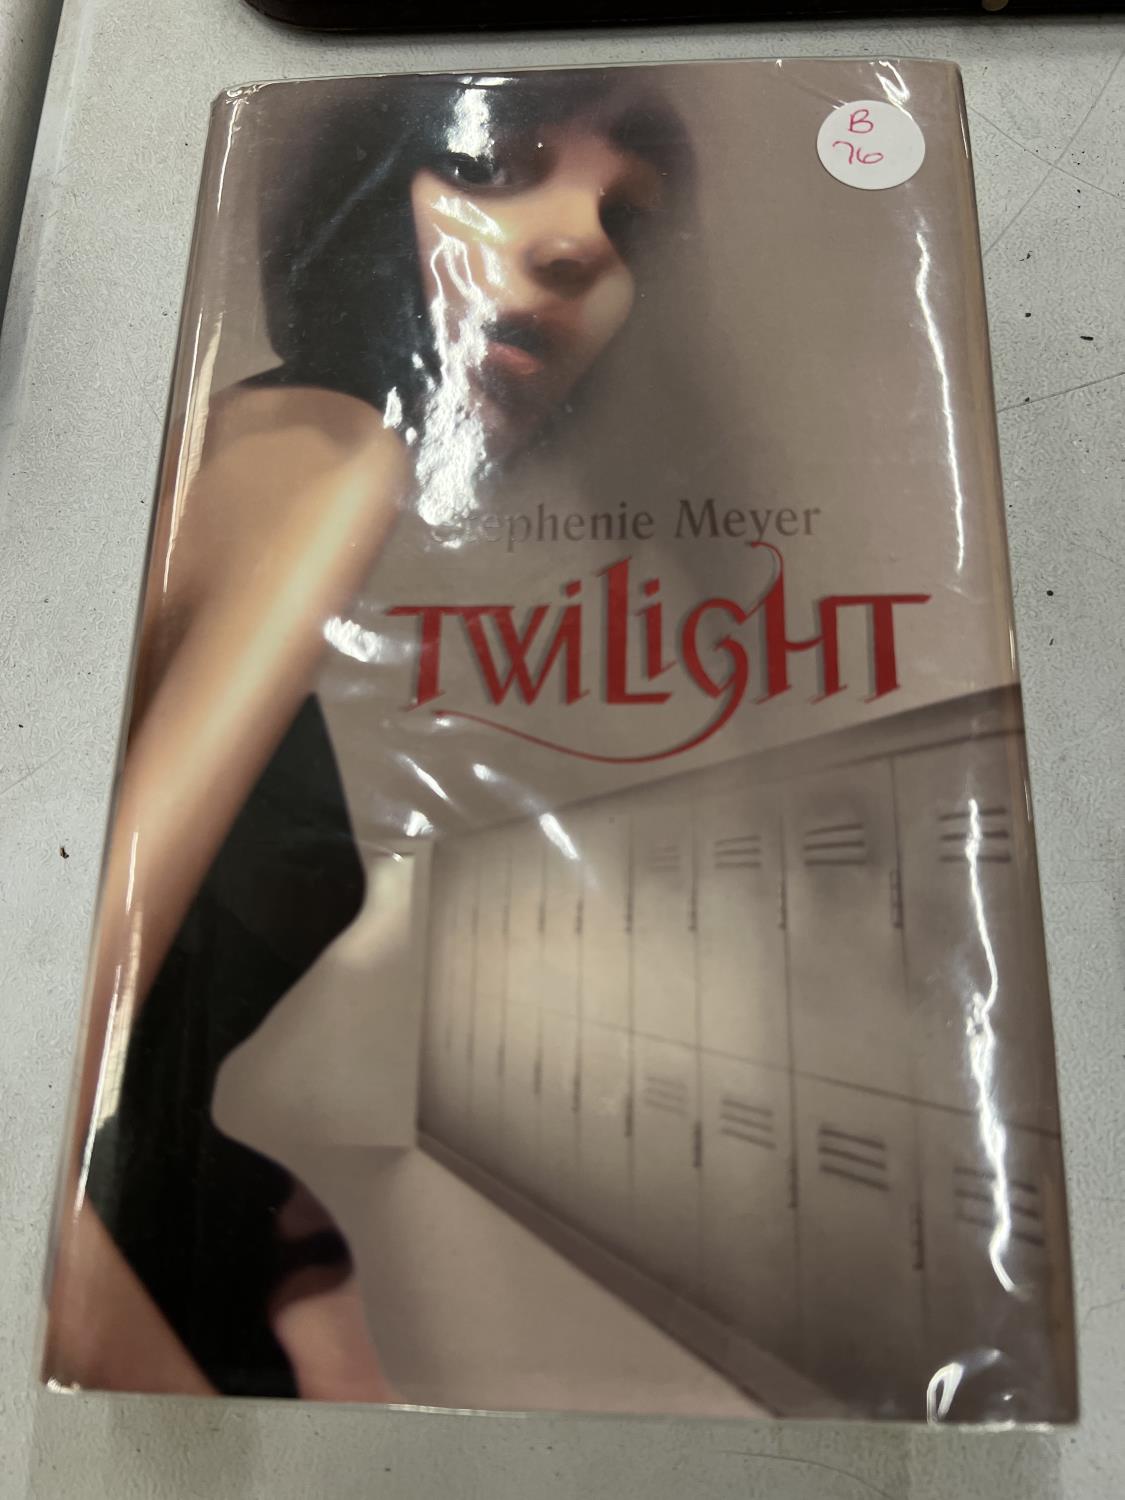 A UK FIRST EDITION WITH DUST JACKET 'TWIGLIGHT' BY STEPHENIE MEYER 2006 PUBLISHED BY ATOM